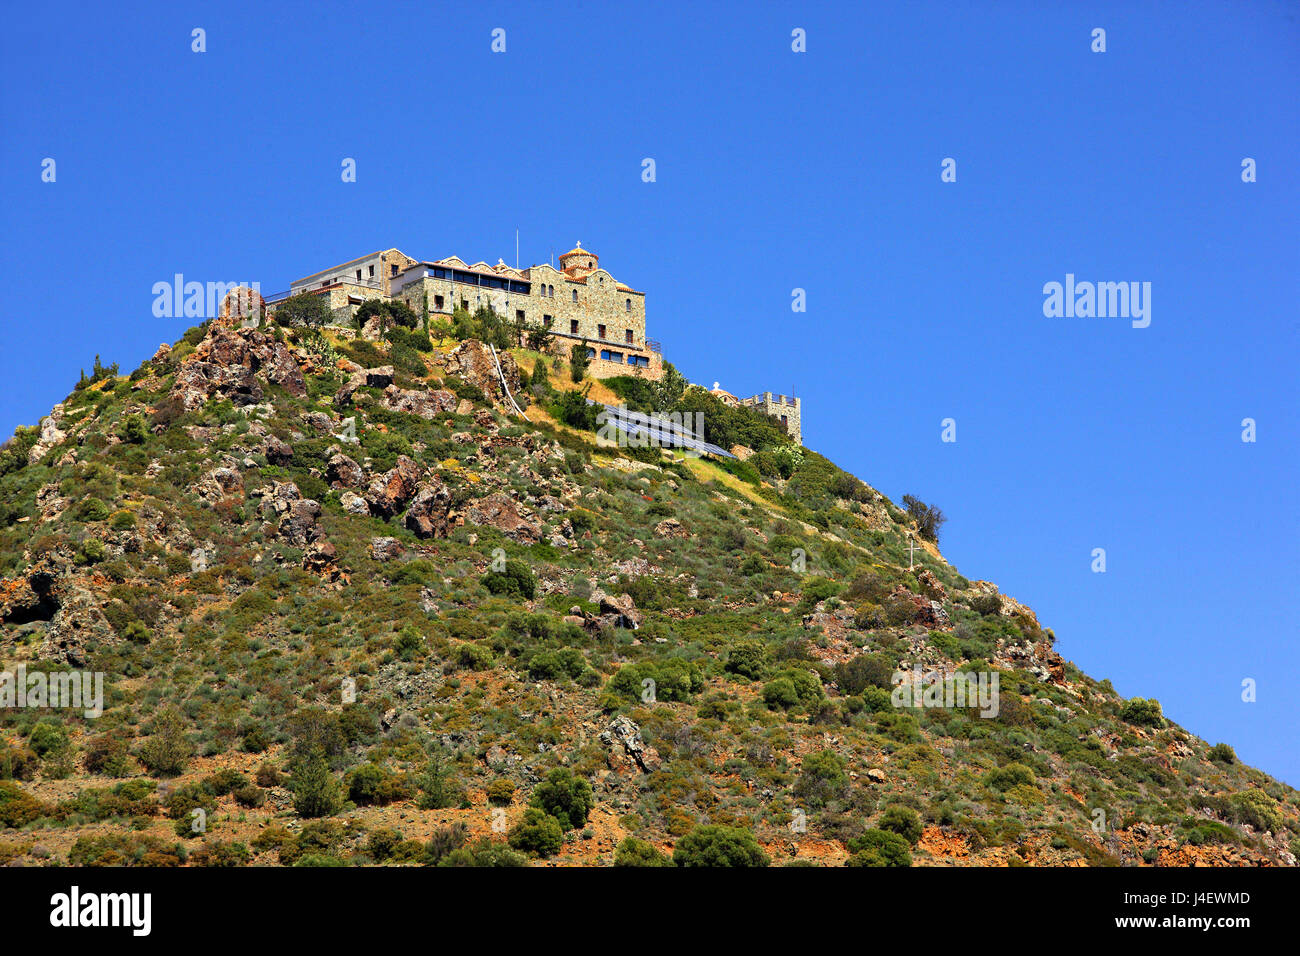 Stavrovouni Monastery is a Greek Orthodox monastery which stands on the top of a hill called Stavrovouni, Larnaca district, Cyprus. Stock Photo